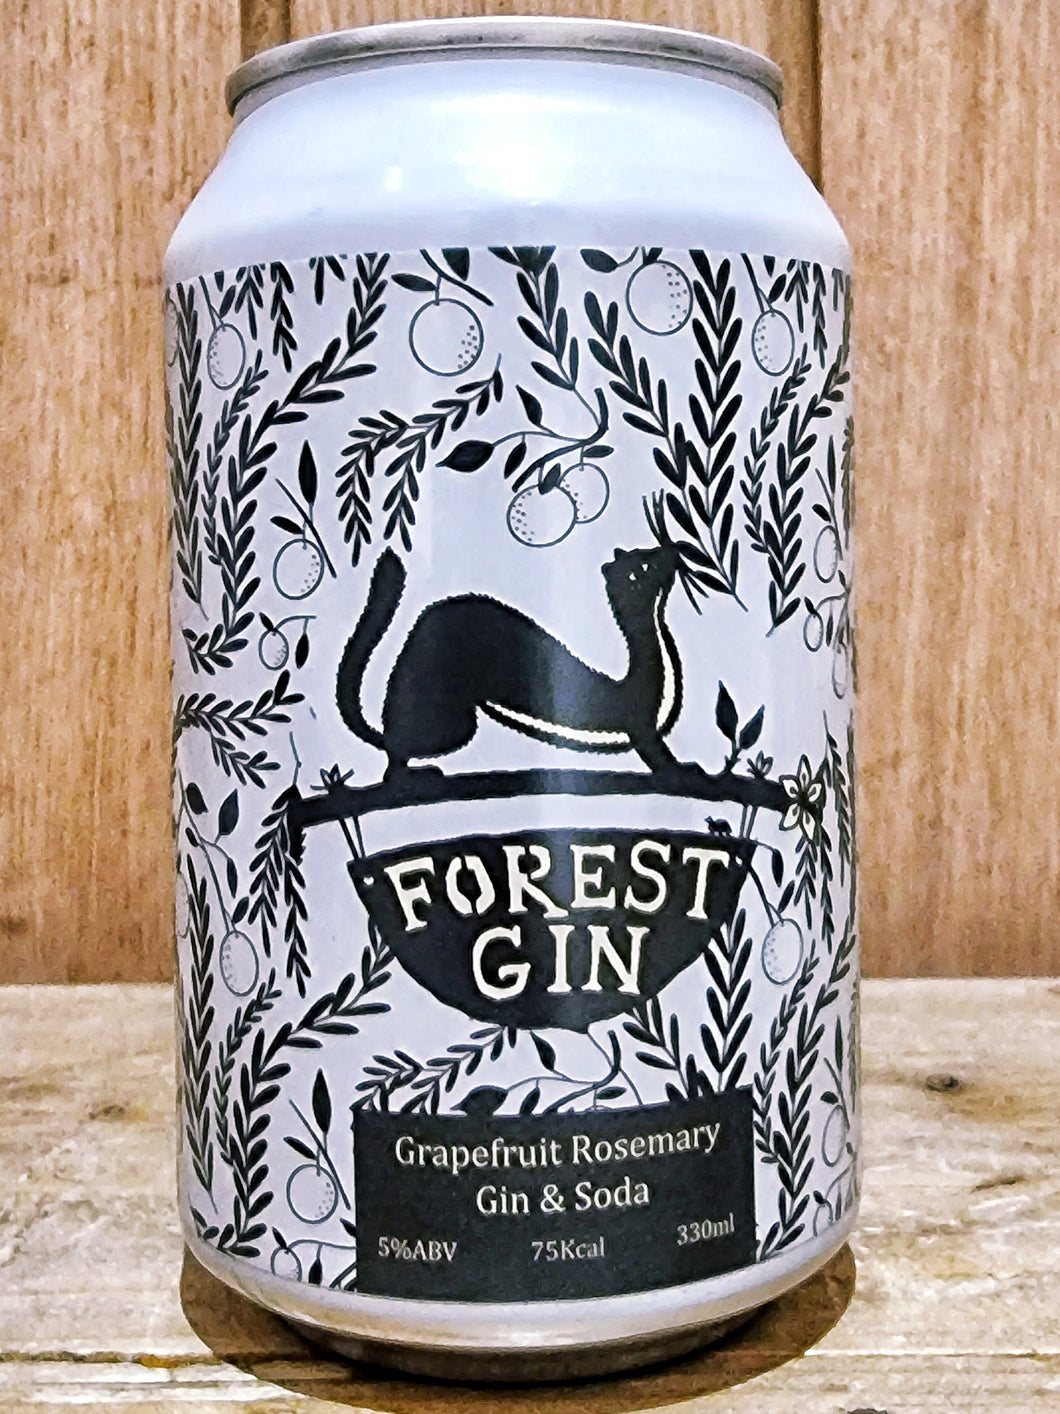 Forest Distillery - Grapefruit and Rosemary Gin & Soda